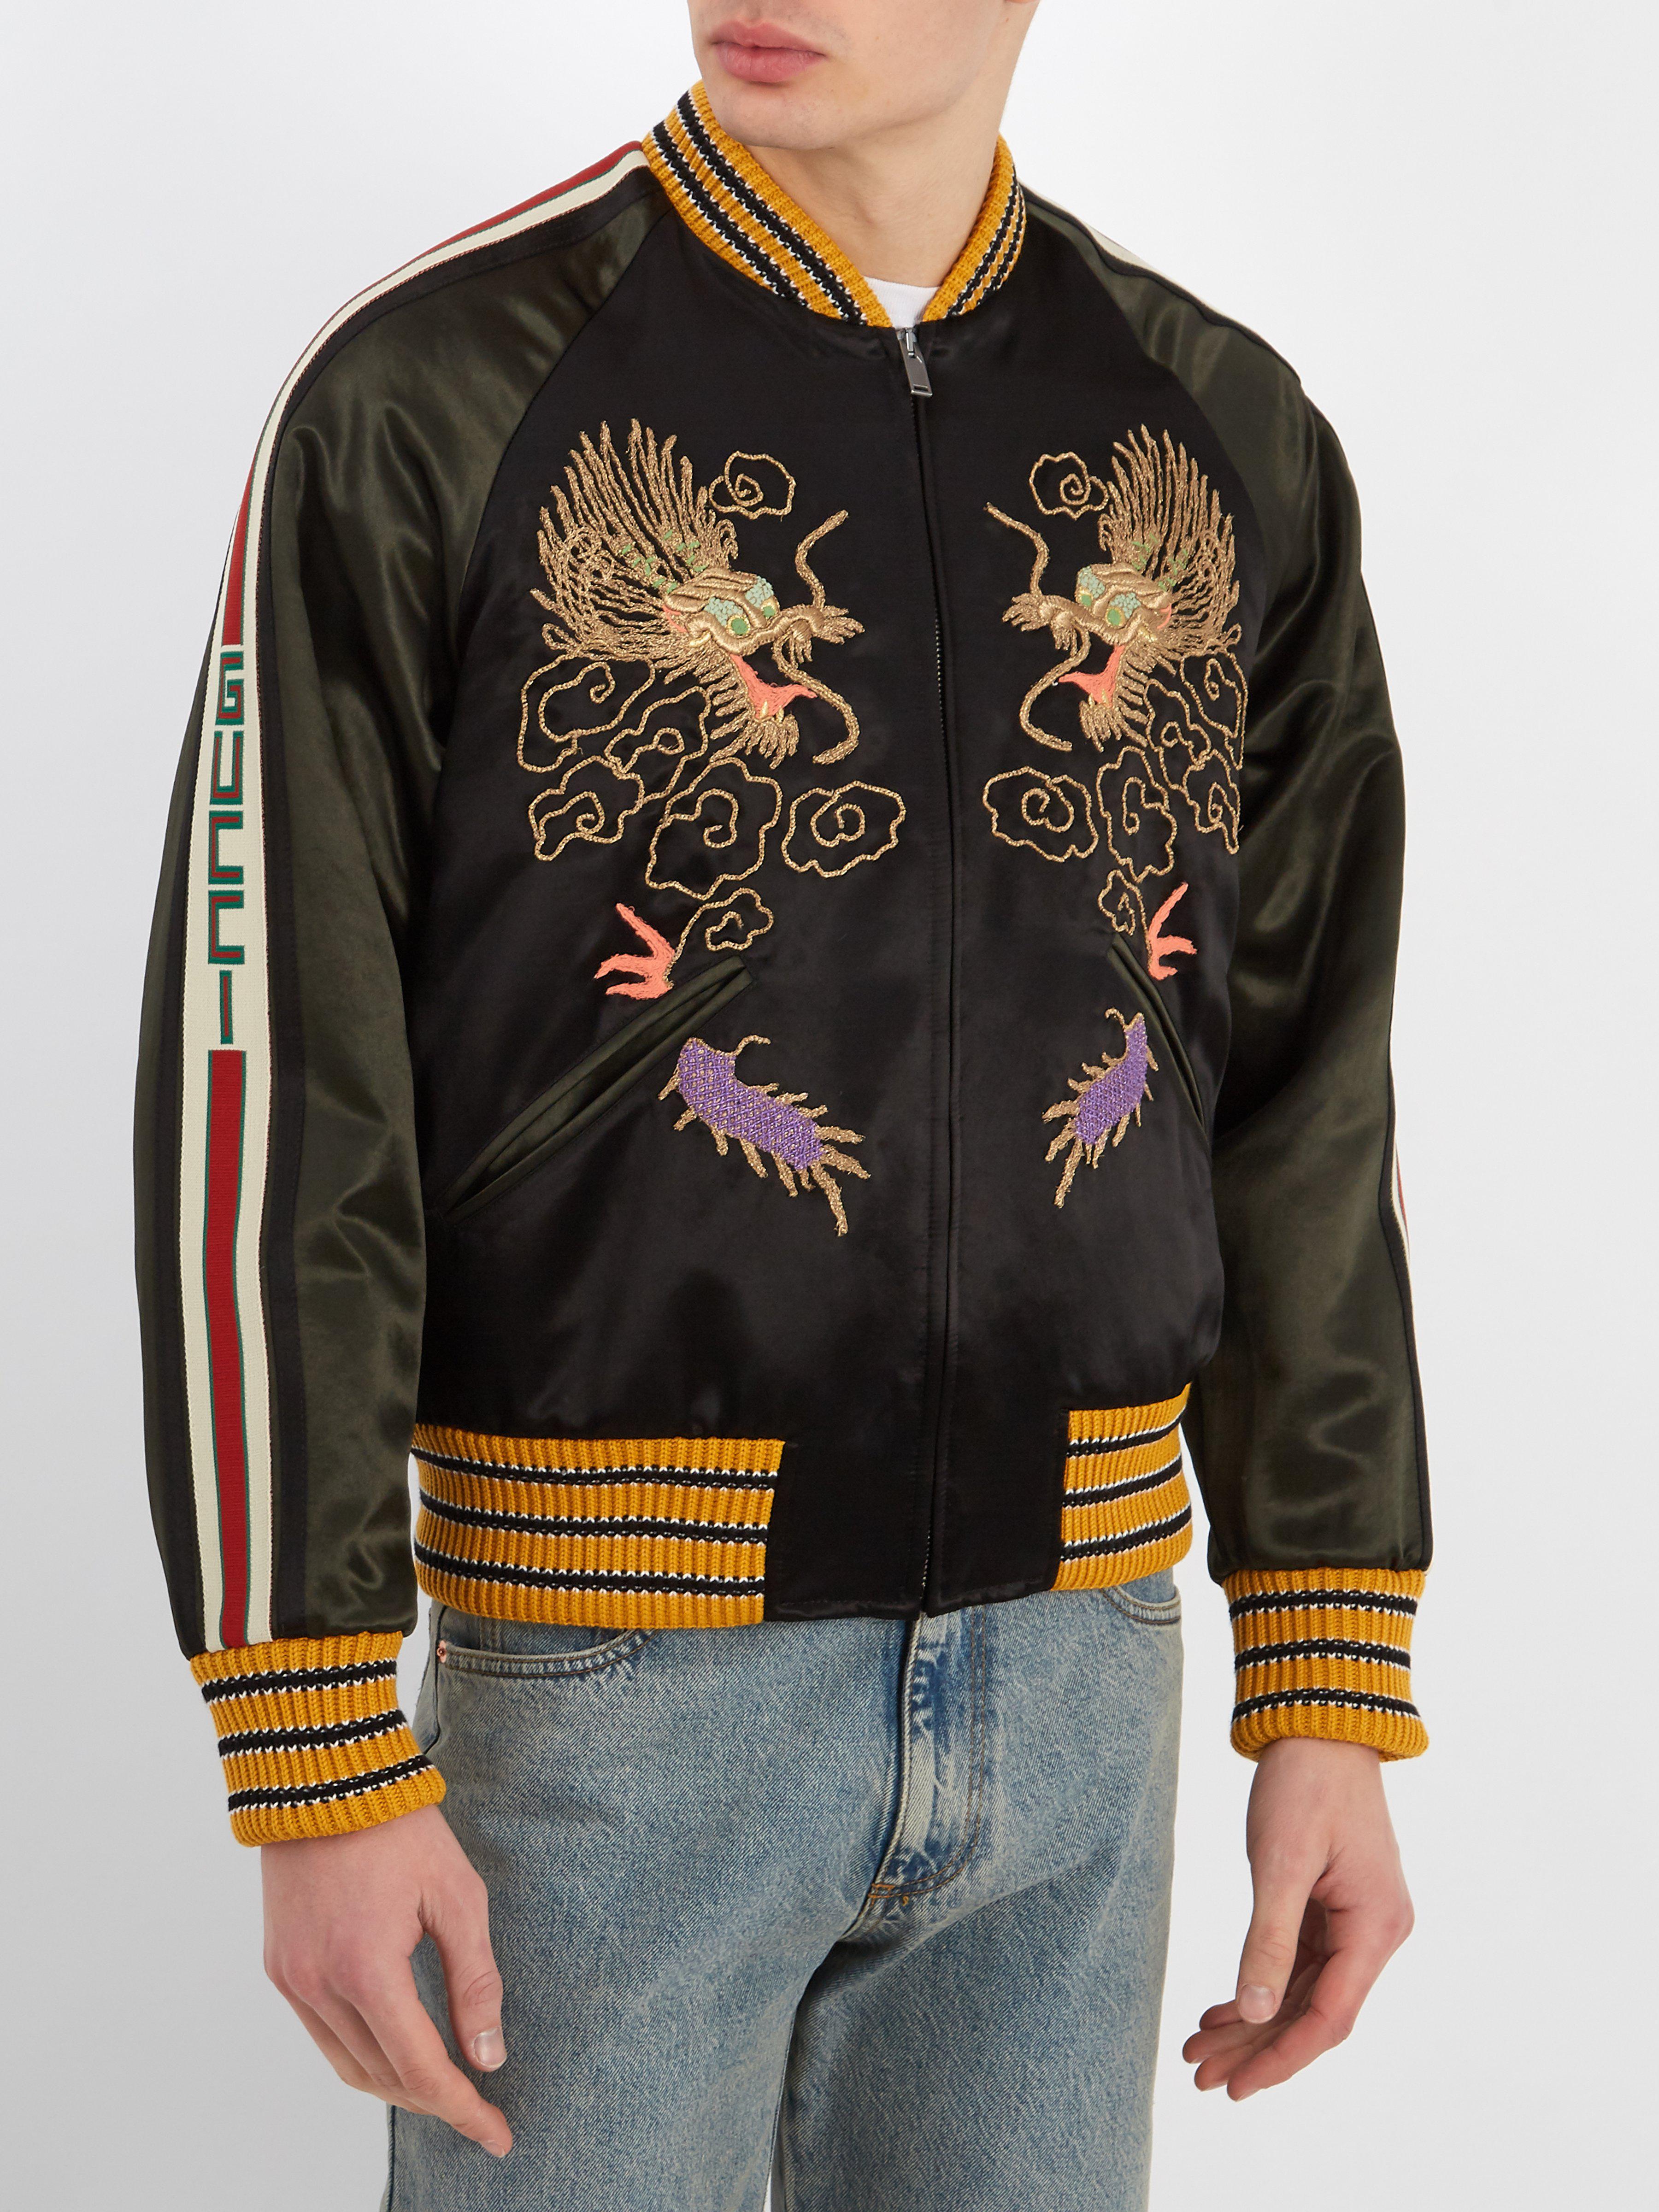 Gucci Satin Dragon Embroidered Bomber Jacket in Black for Men - Lyst